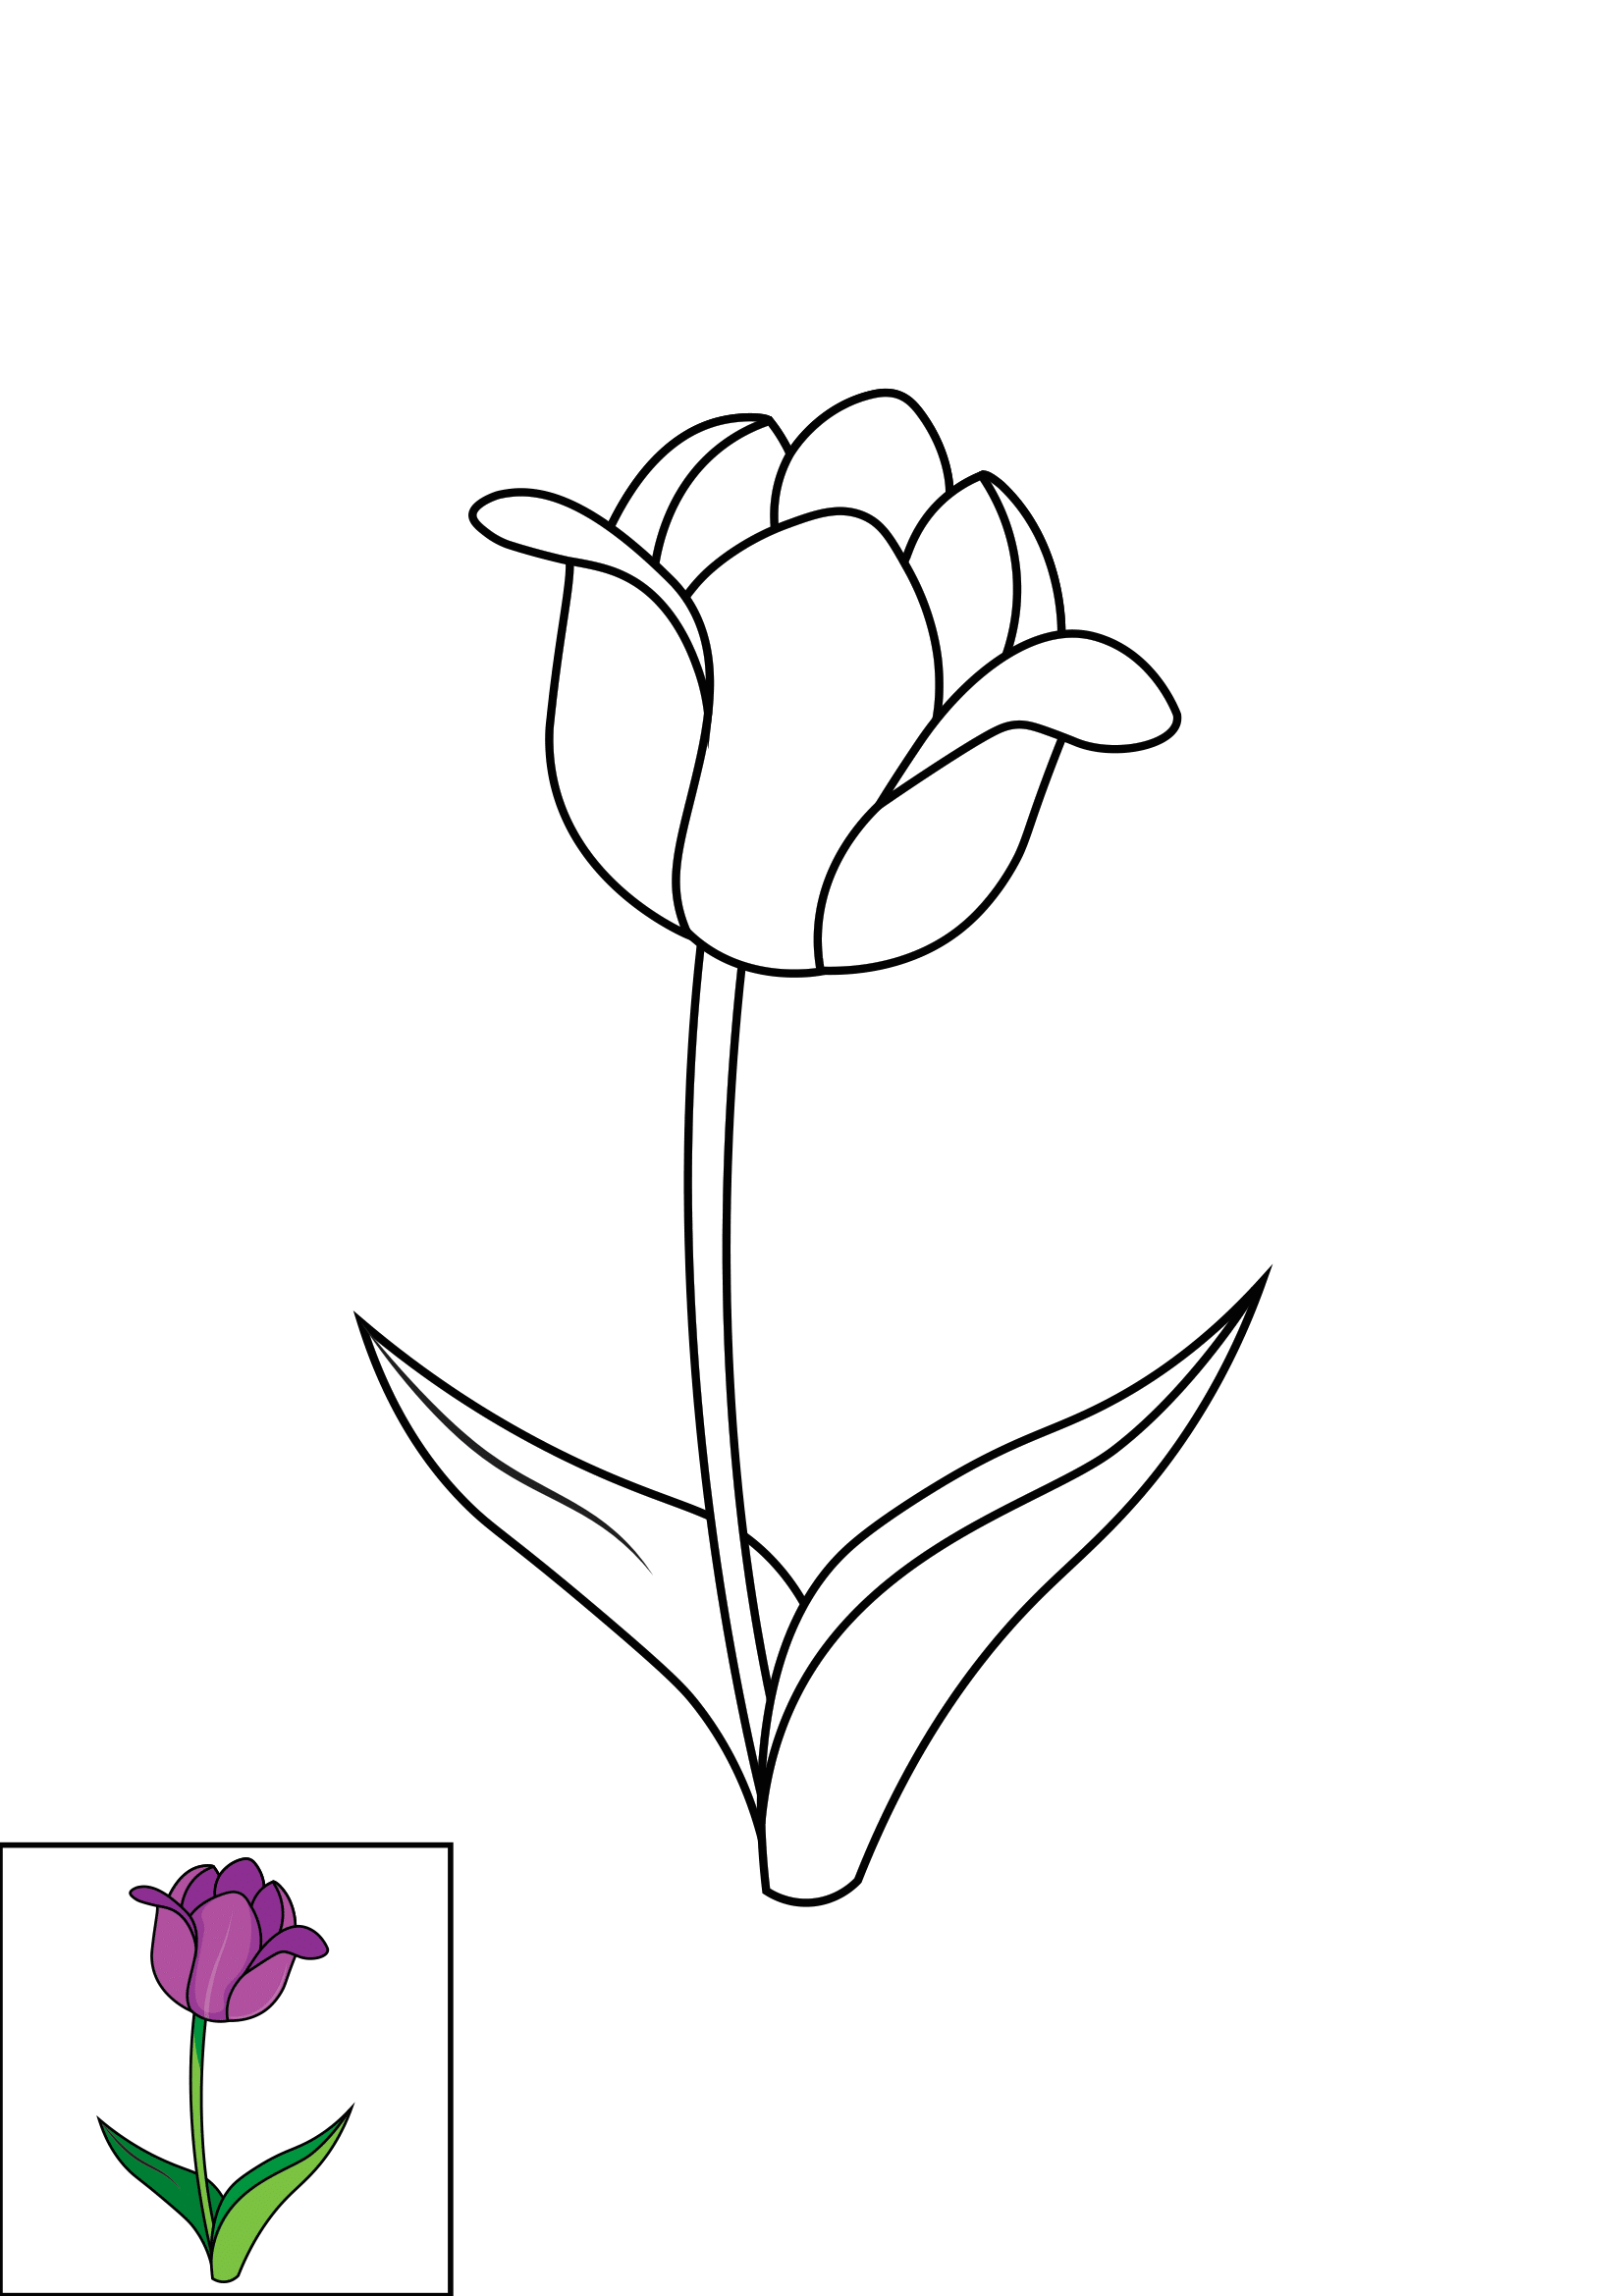 How to Draw A Tulip Step by Step Printable Color